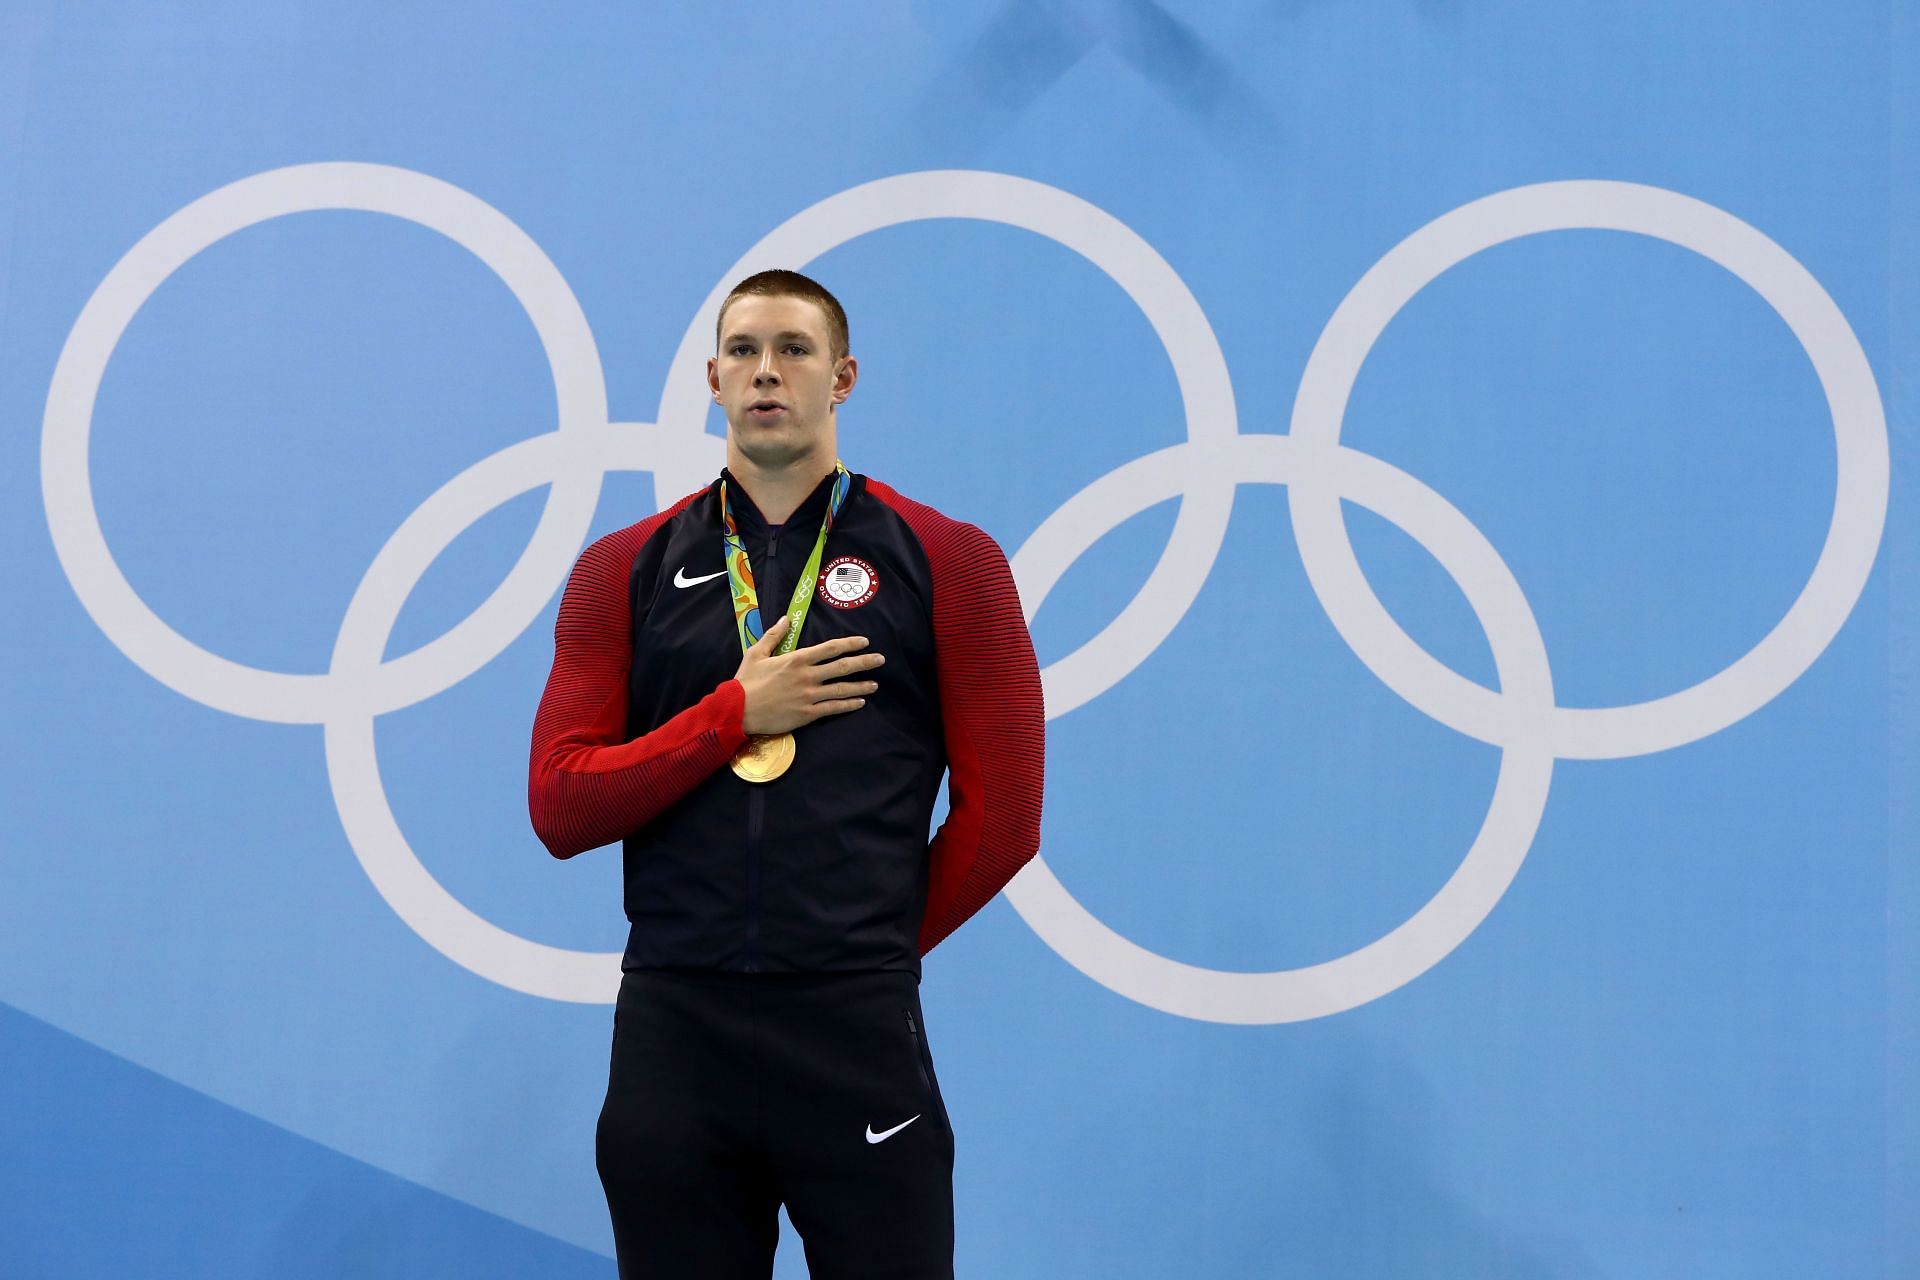 Murphy Poses at the Medal Ceremony After Winning Gold at the 100 Meter Backstroke. Swimming - Rio Olympics, 2016 (Photo by Al Bello/Getty Images)